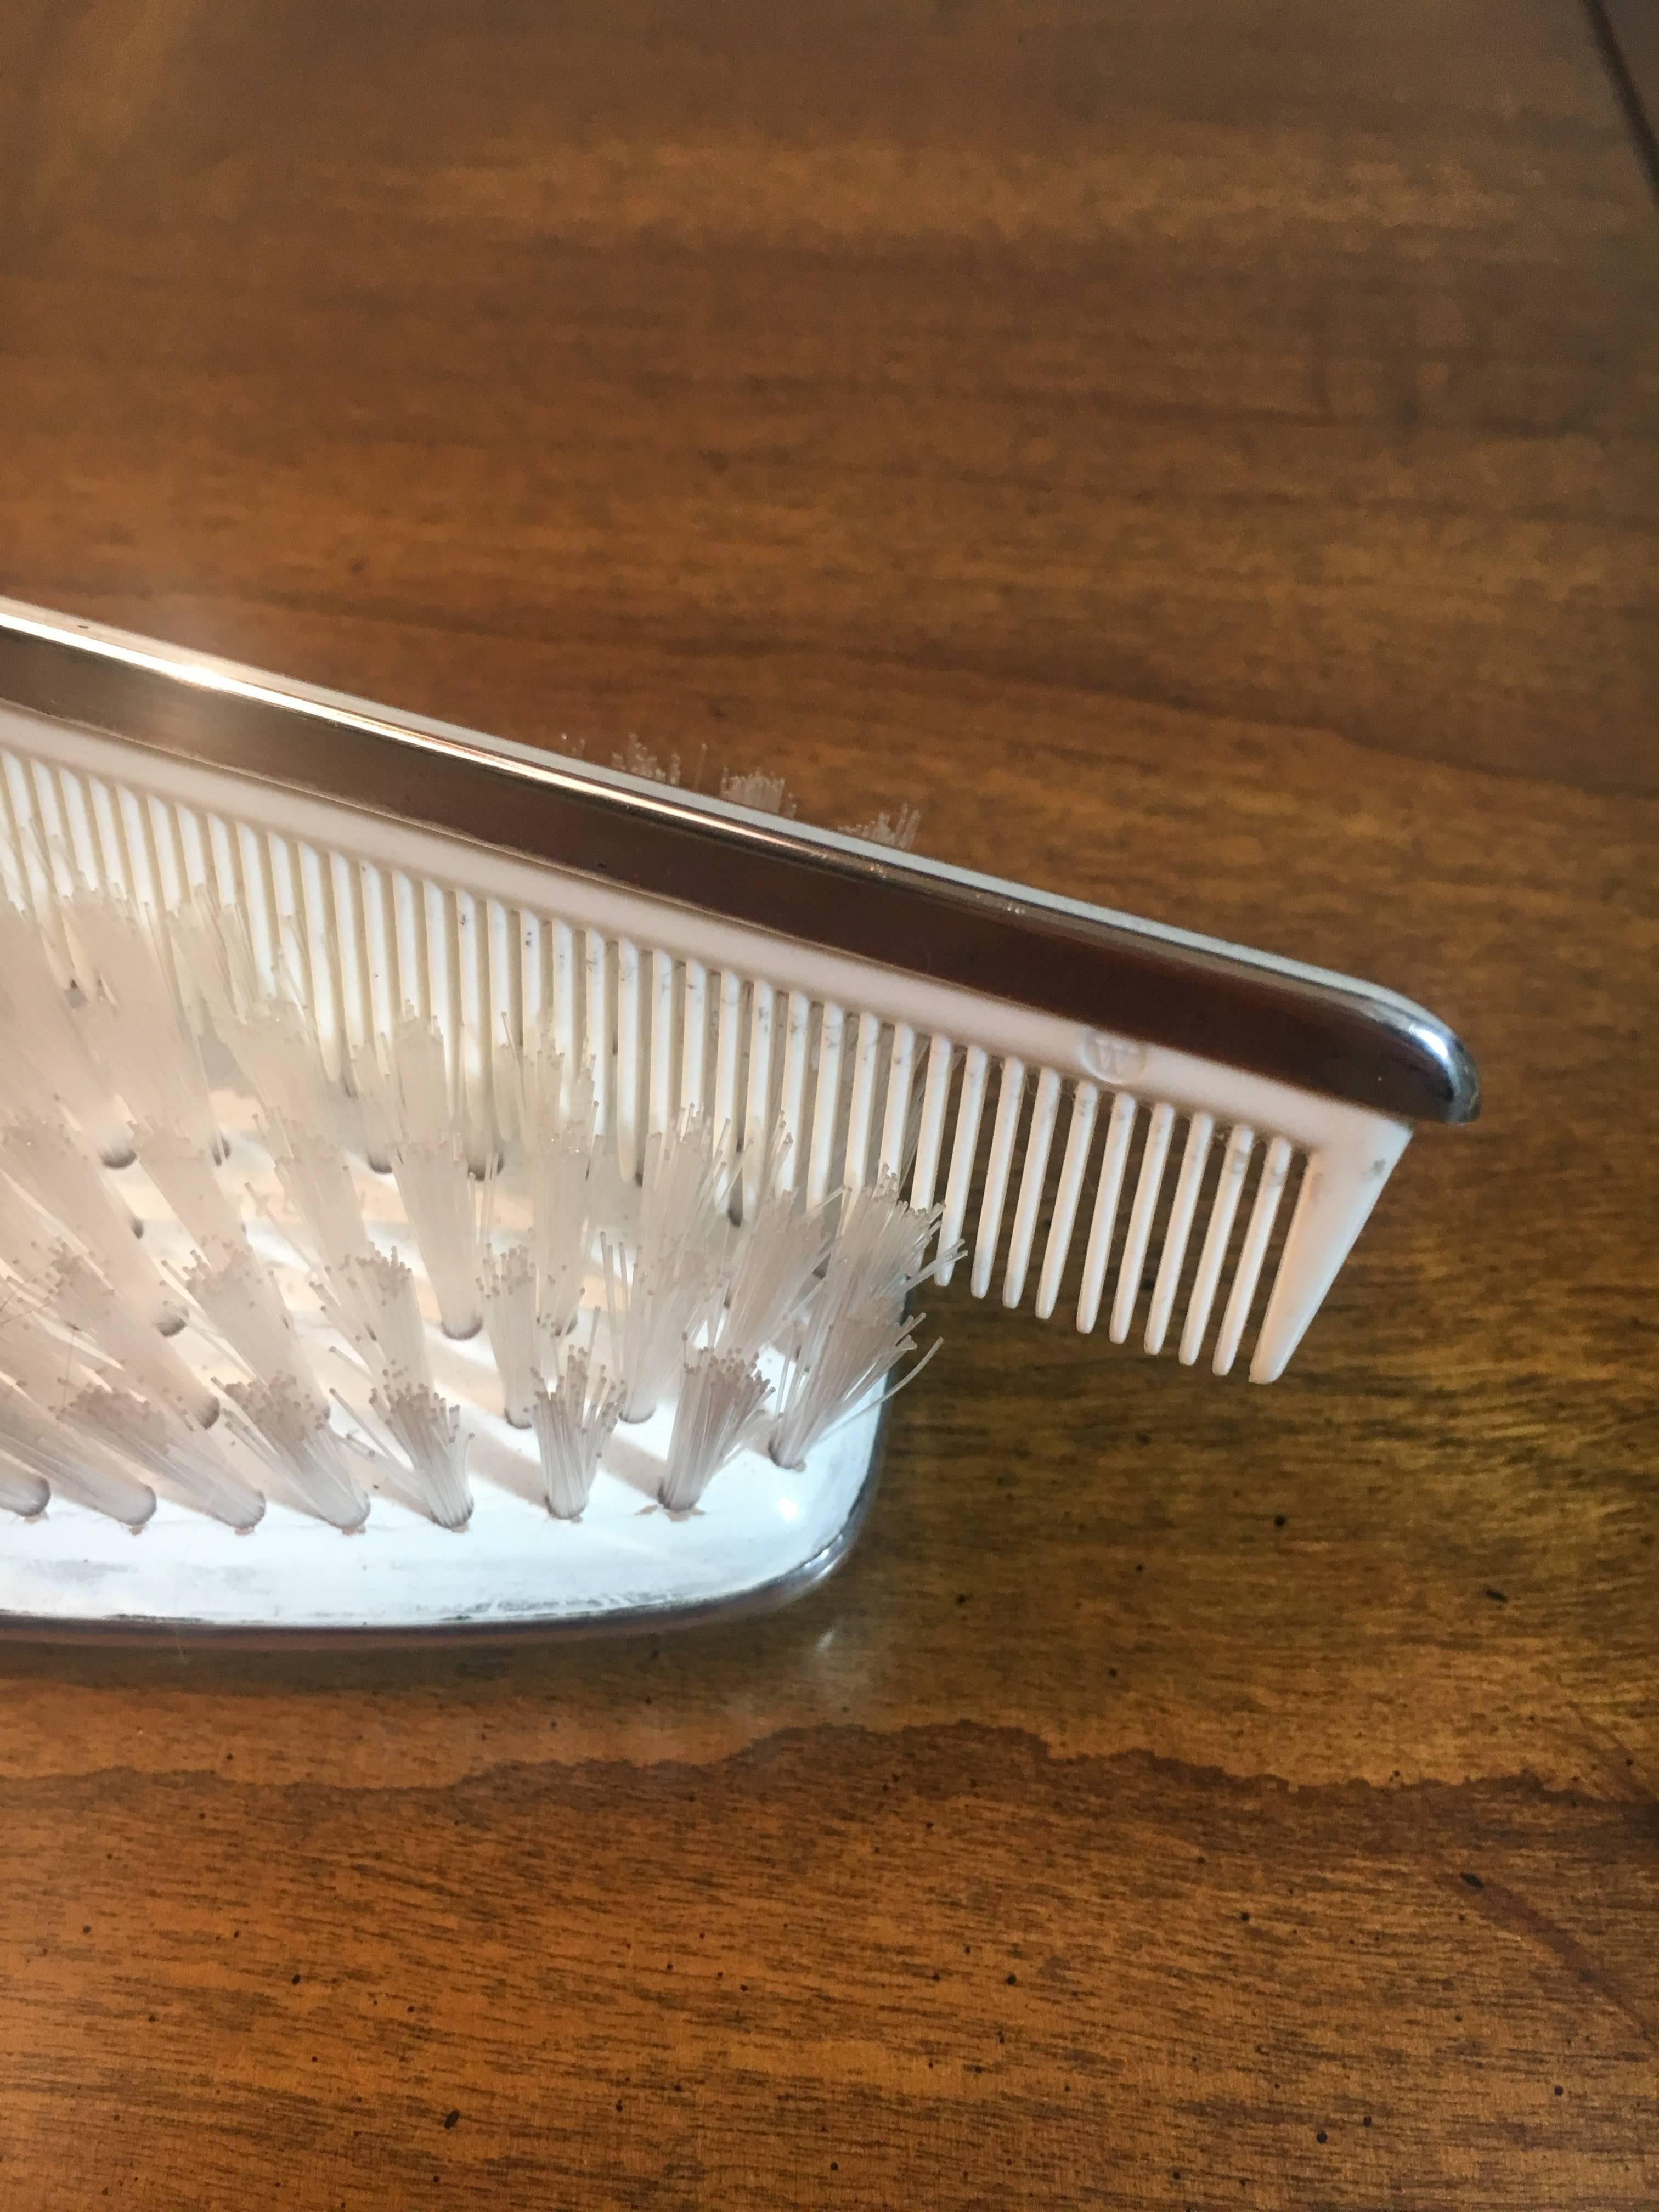 Engravable Sterling silver baby brush & comb - sterling silver on top of Brush and rim of comb - the top of brush is easily engraved and made for initials or baby name. A great Baby shower or baby gift.
Comb 4.5